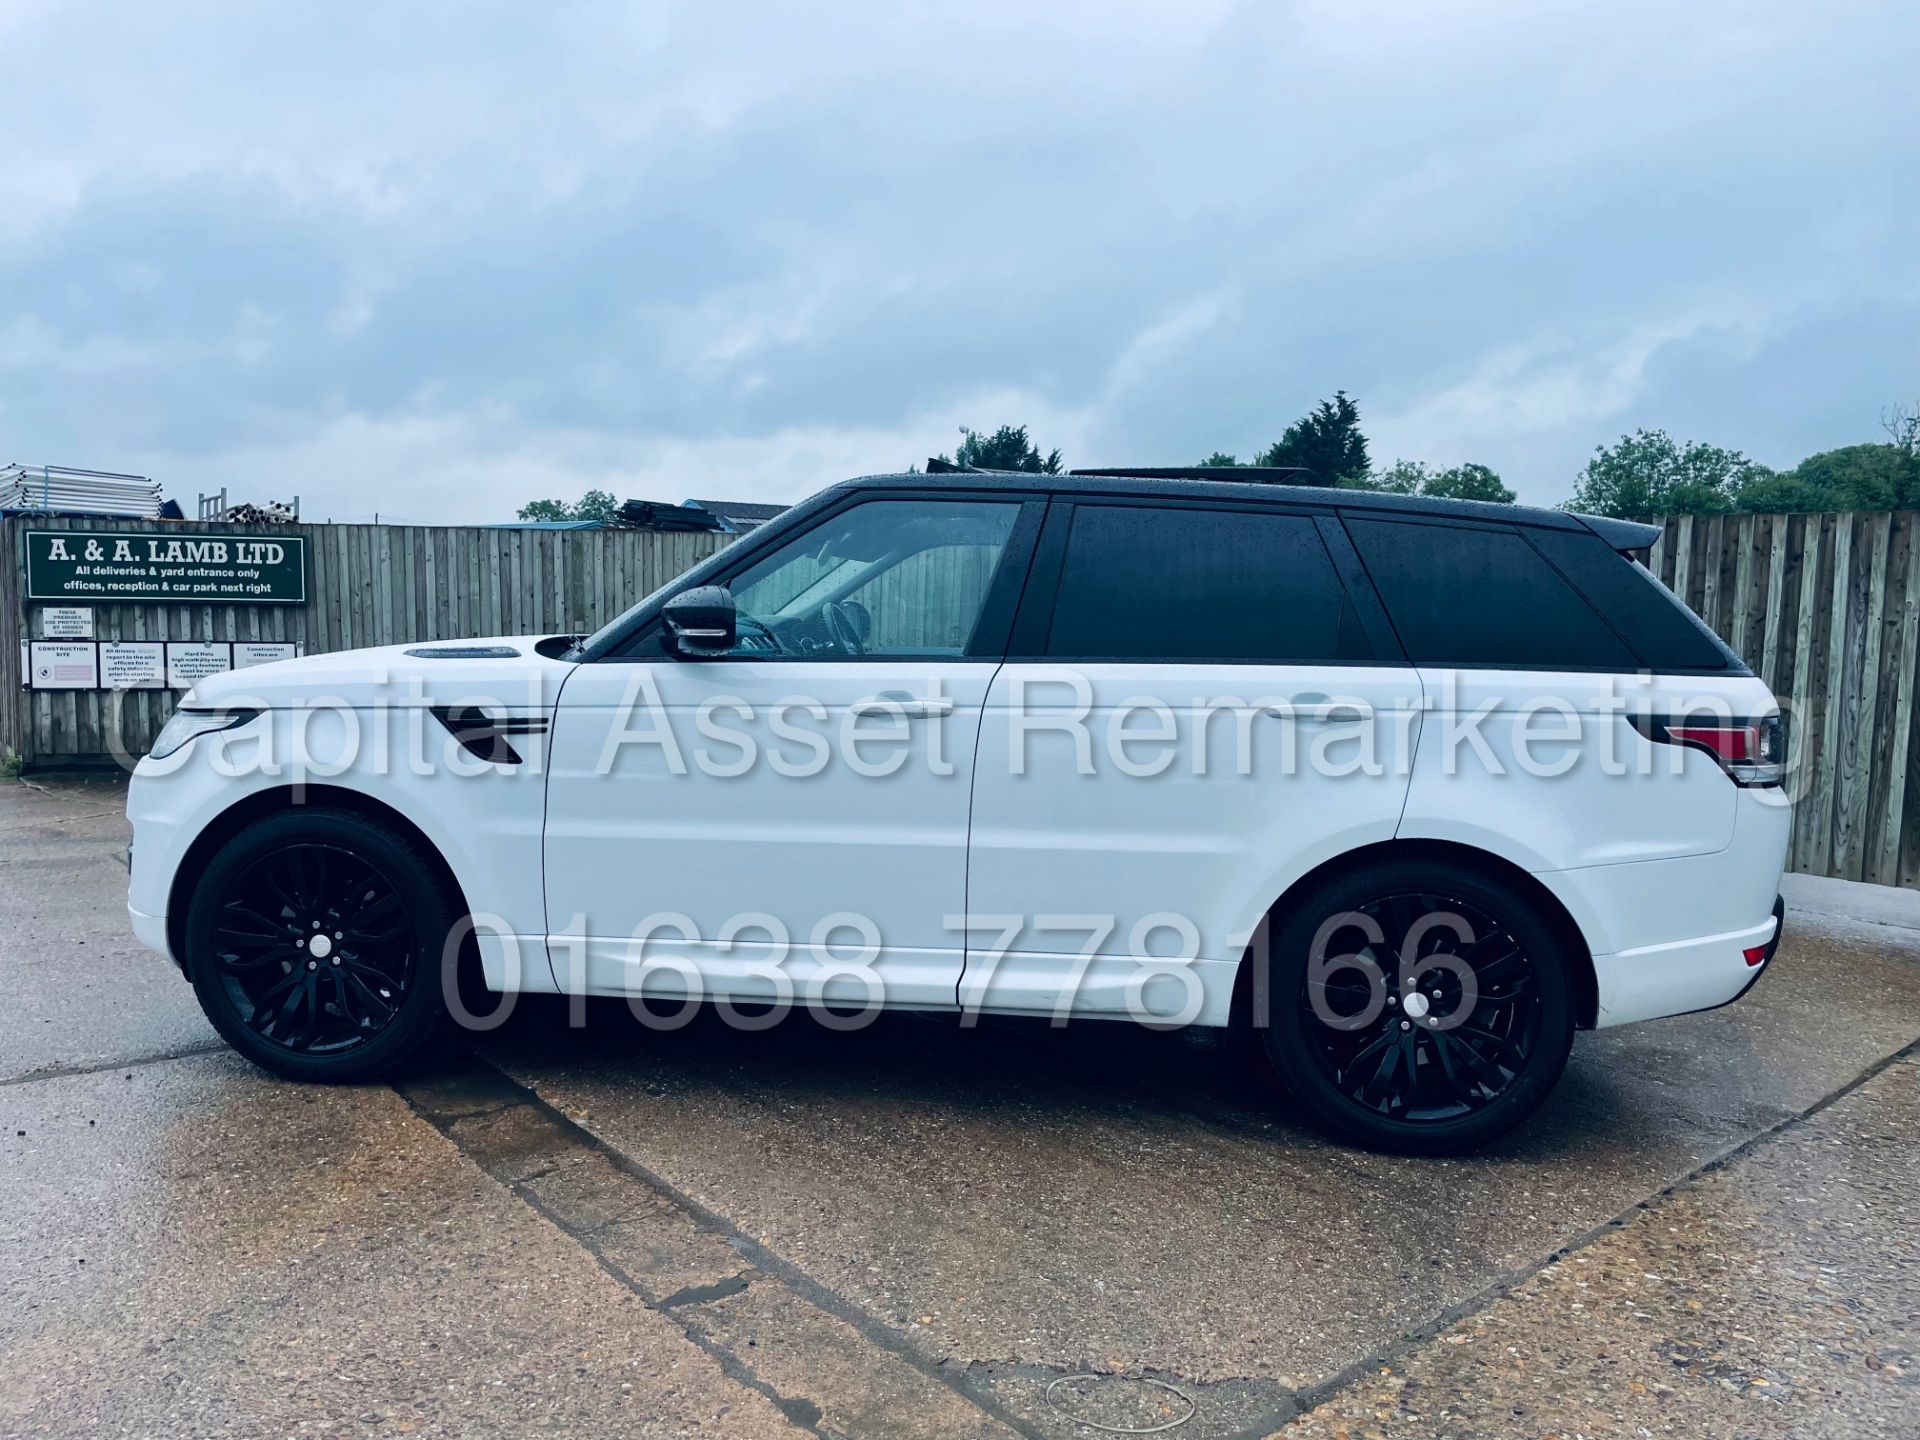 On Sale RANGE ROVER SPORT *SPECIAL EDITION* (2014) '3.0 TDV6 - AUTO' *SAT NAV & PAN ROOF* (TOP SPEC) - Image 4 of 54